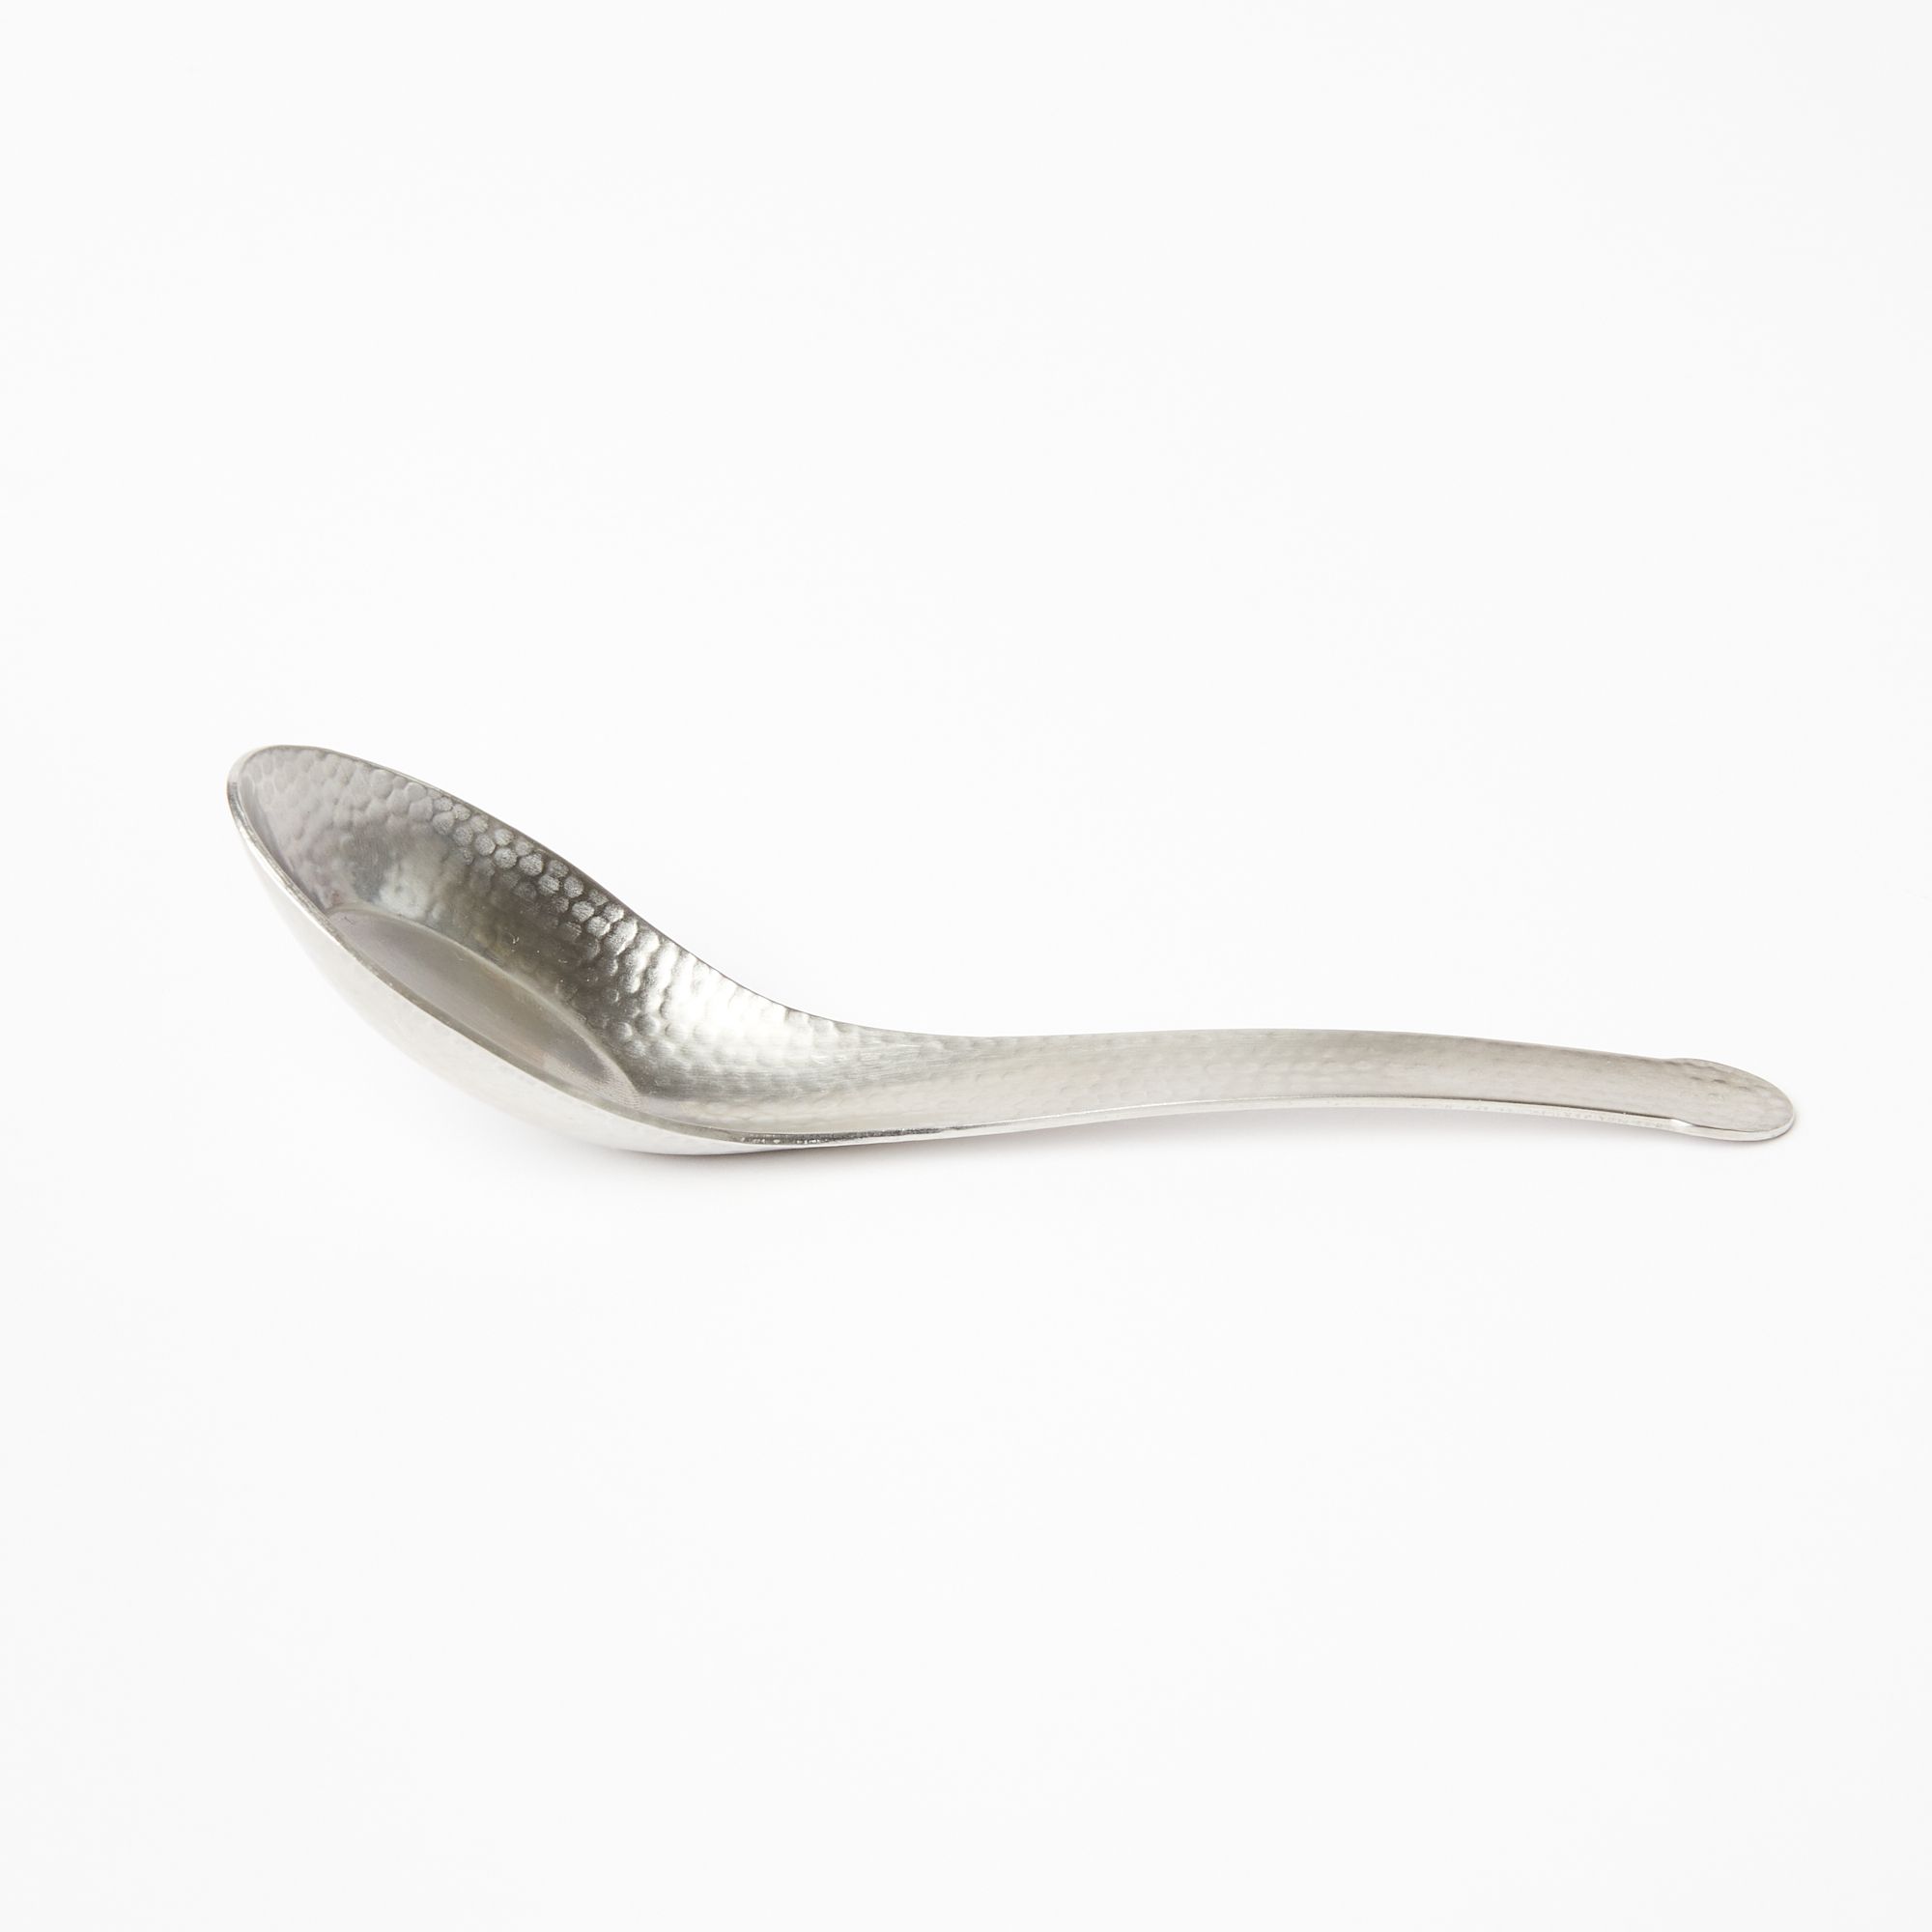 Steel Asian soup spoon with hammered finish